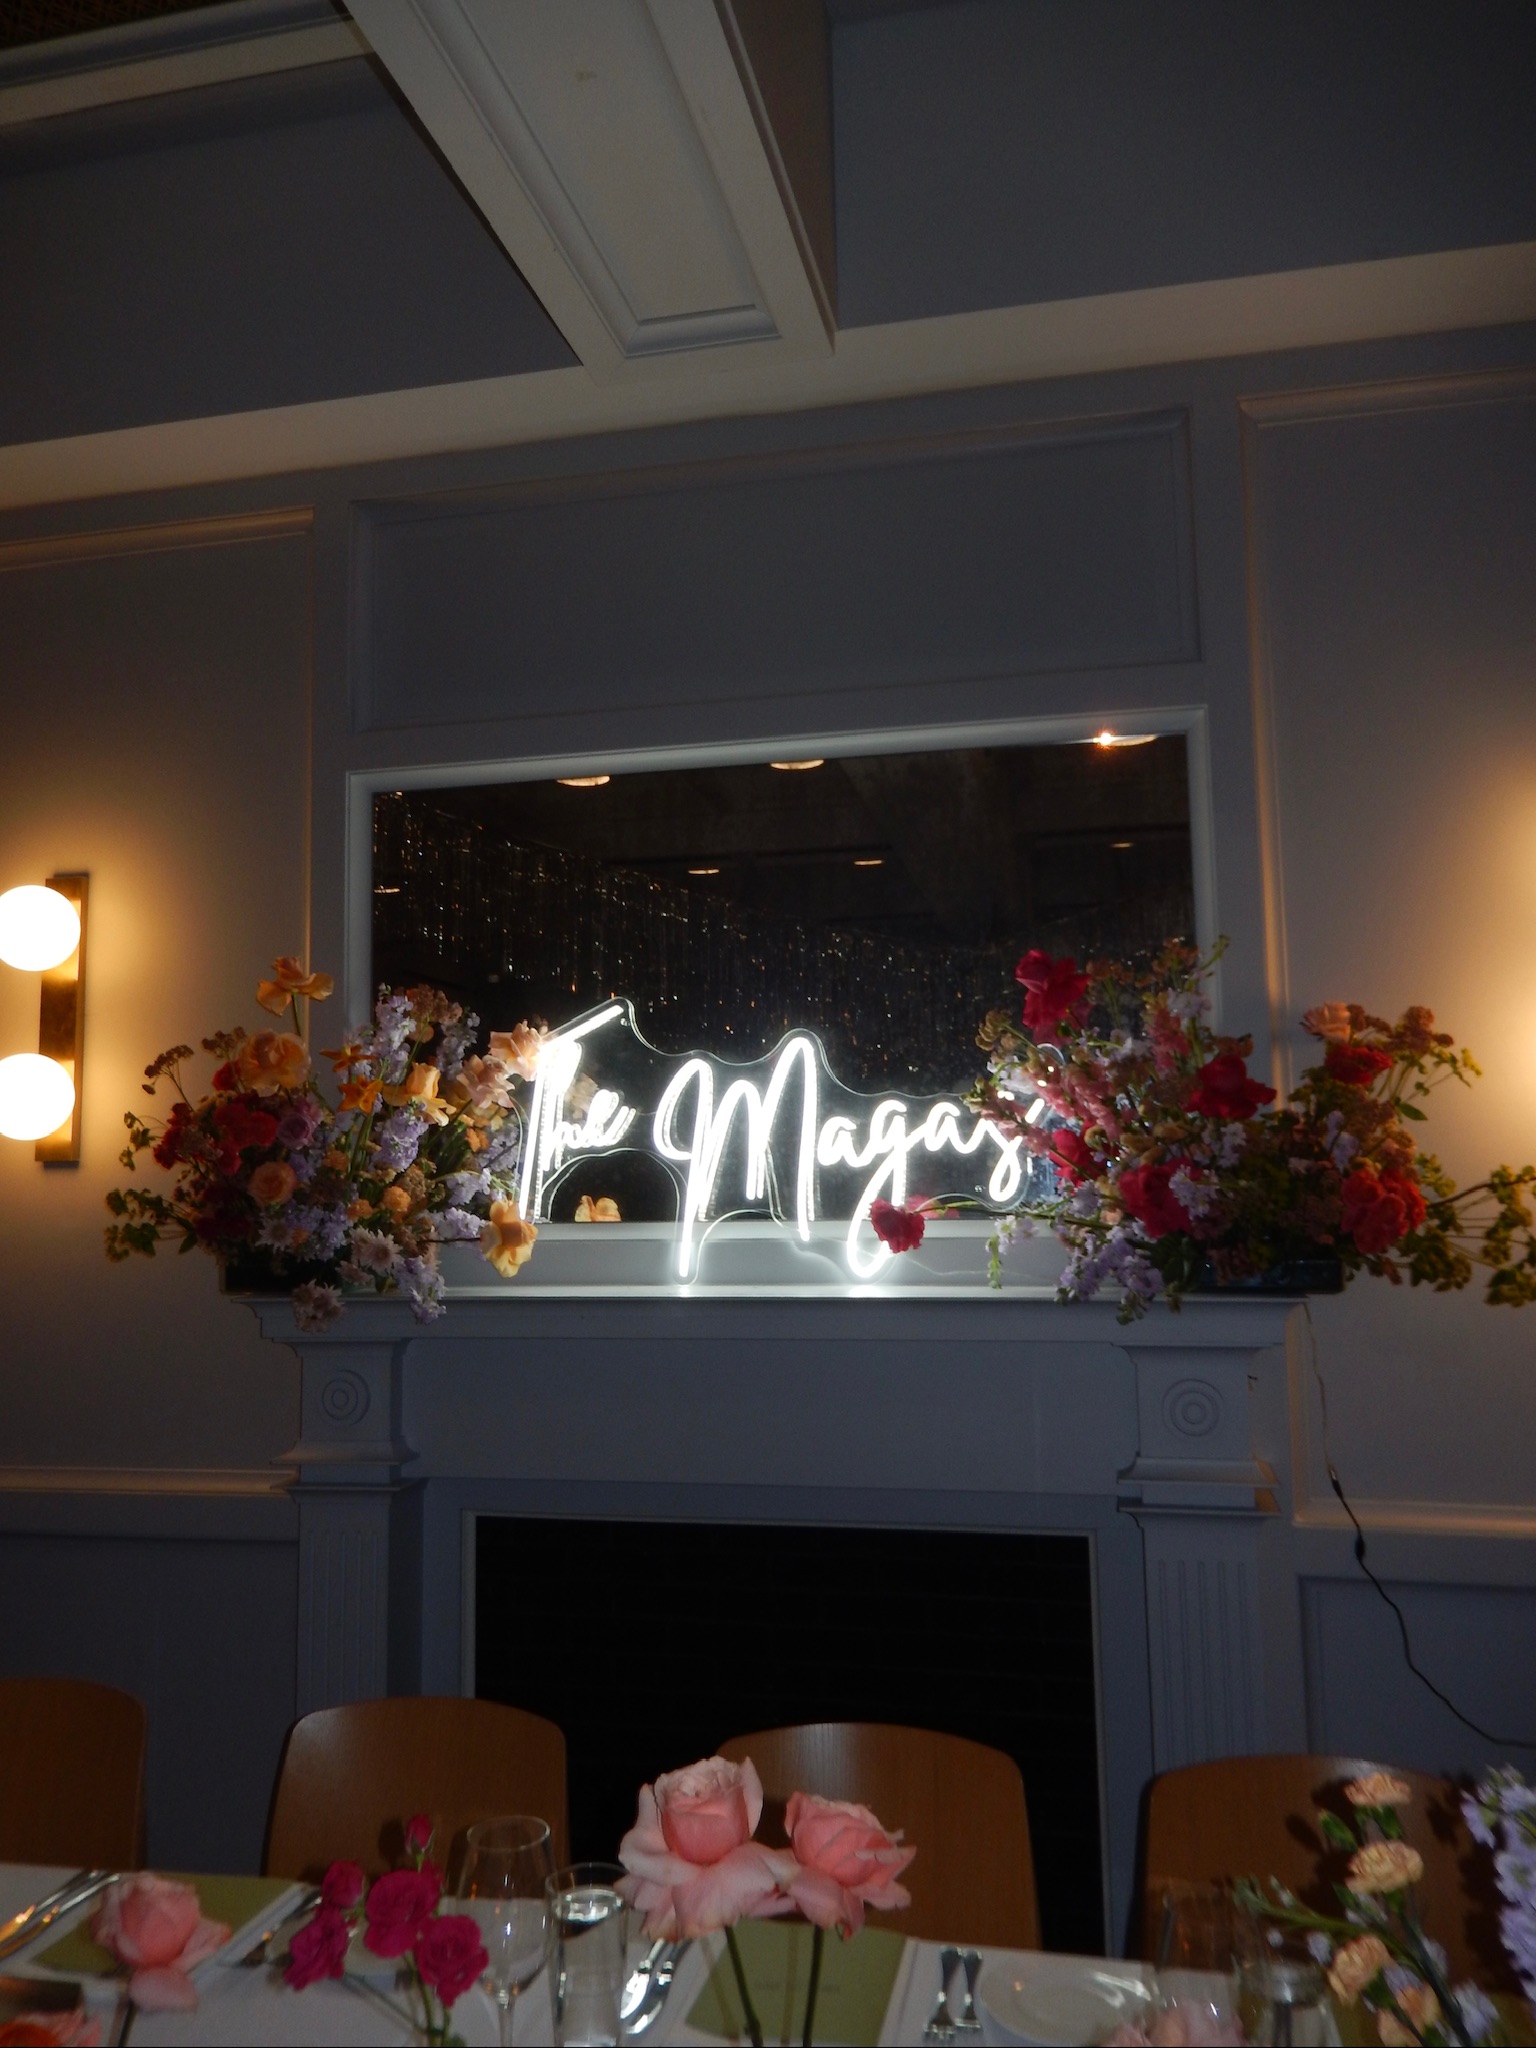 Neon sign saying "The Magas" with floral arrangements on either end, in reception space at The Line hotel in Washington DC